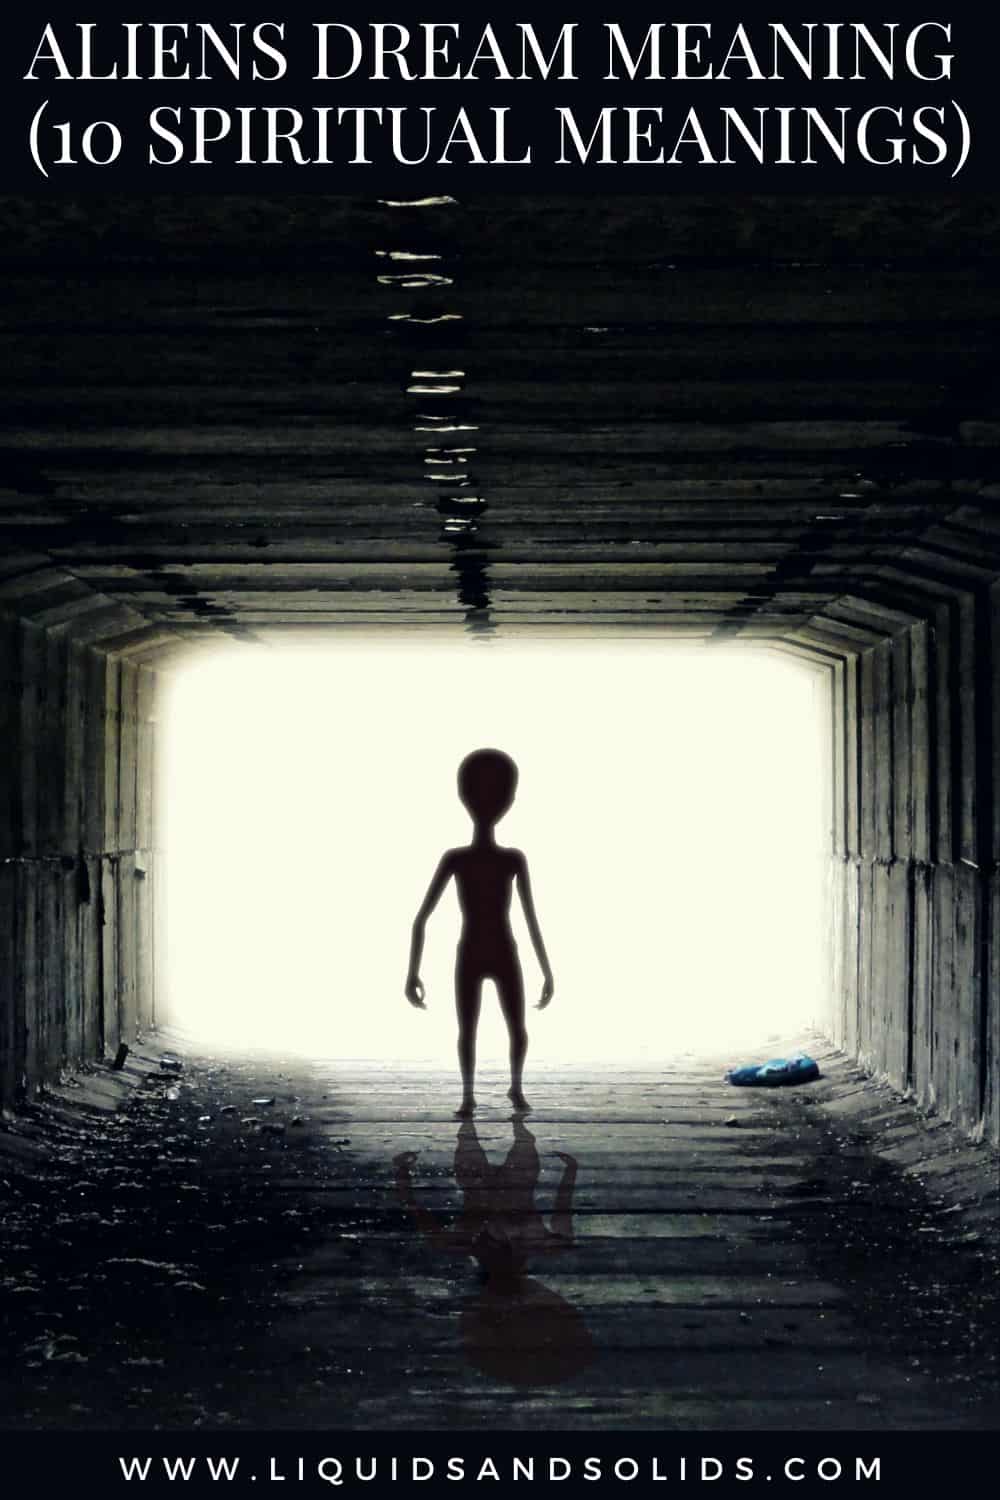 Aliens Dream Meaning (10 Spiritual Meanings)